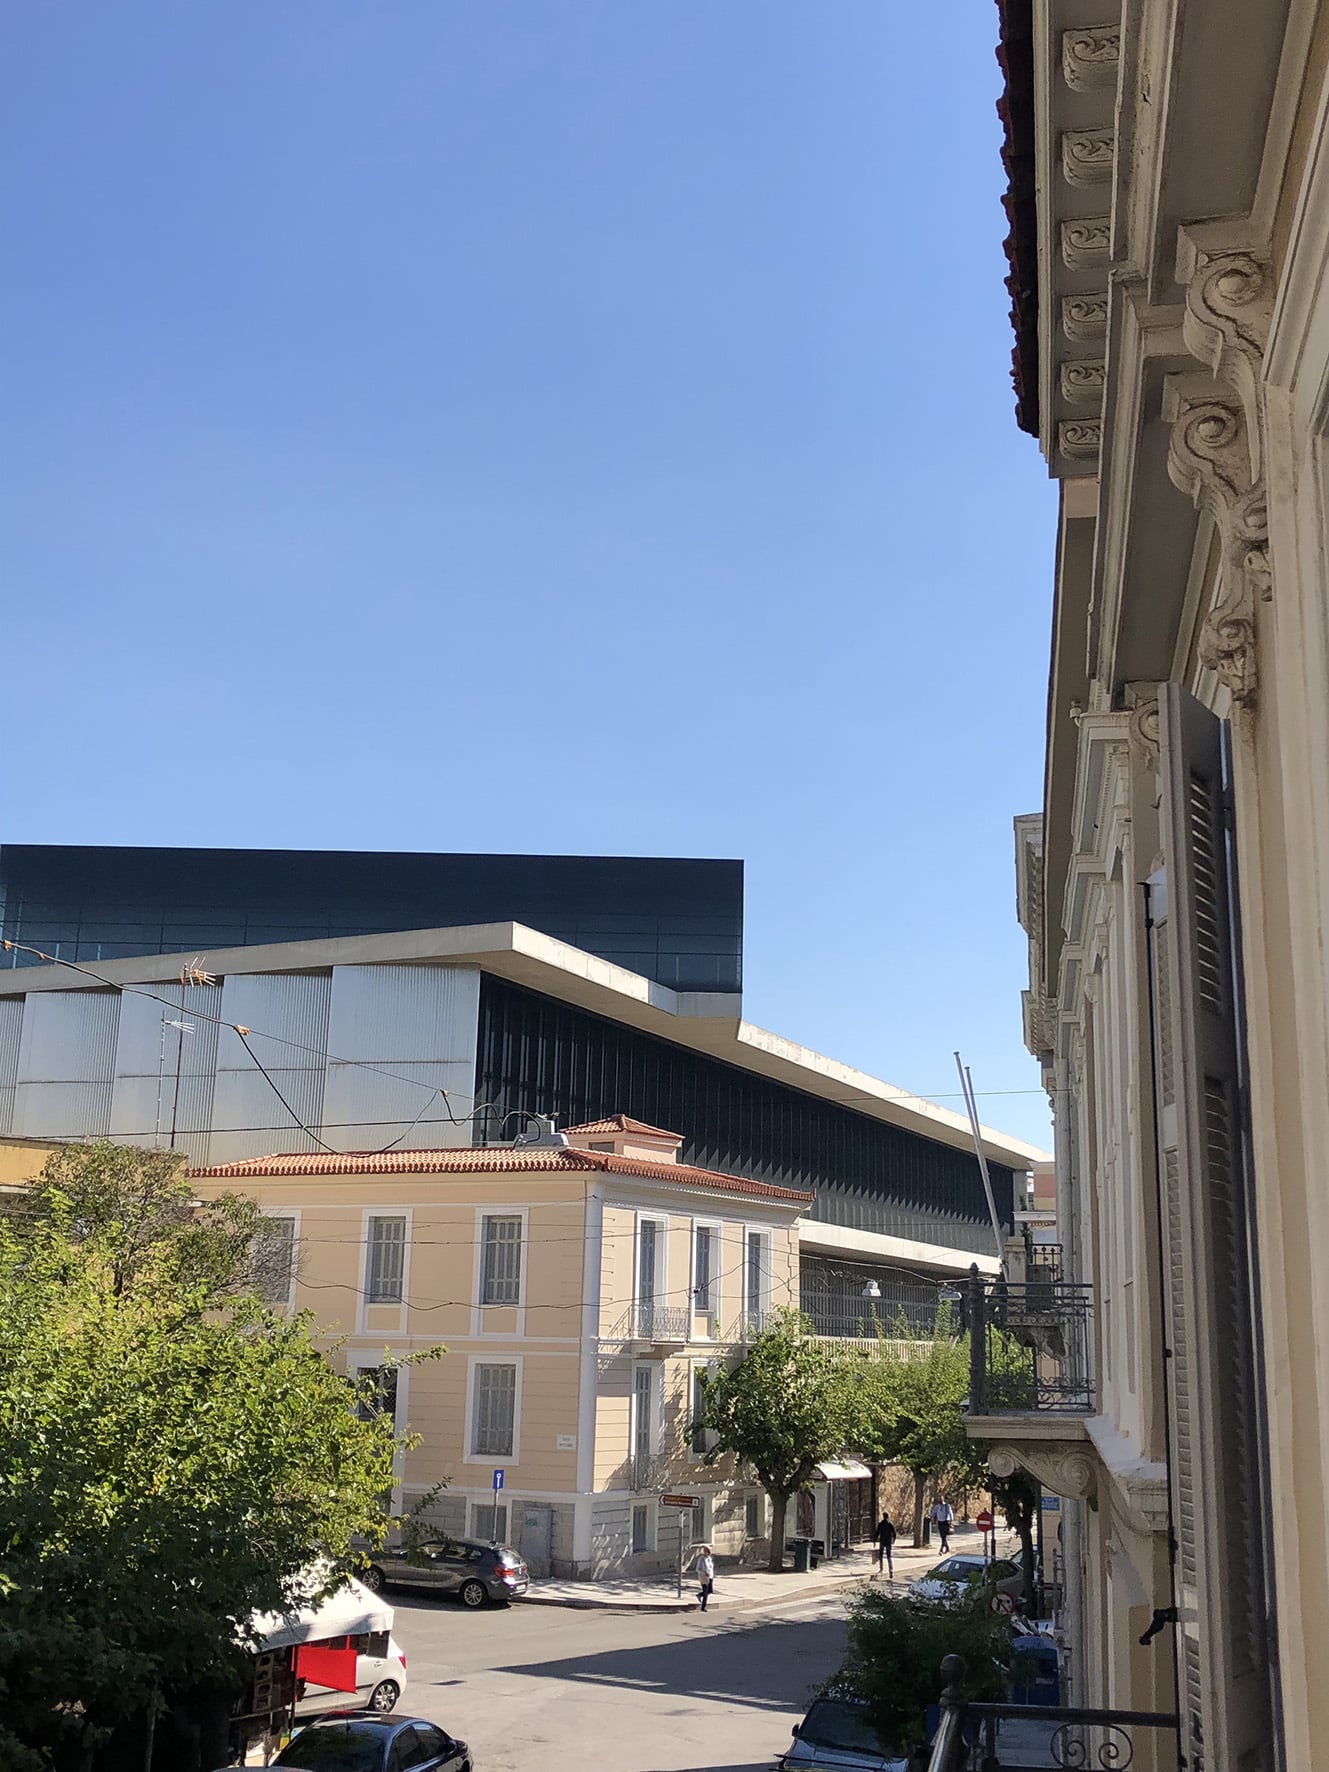 View of Acropolis museum